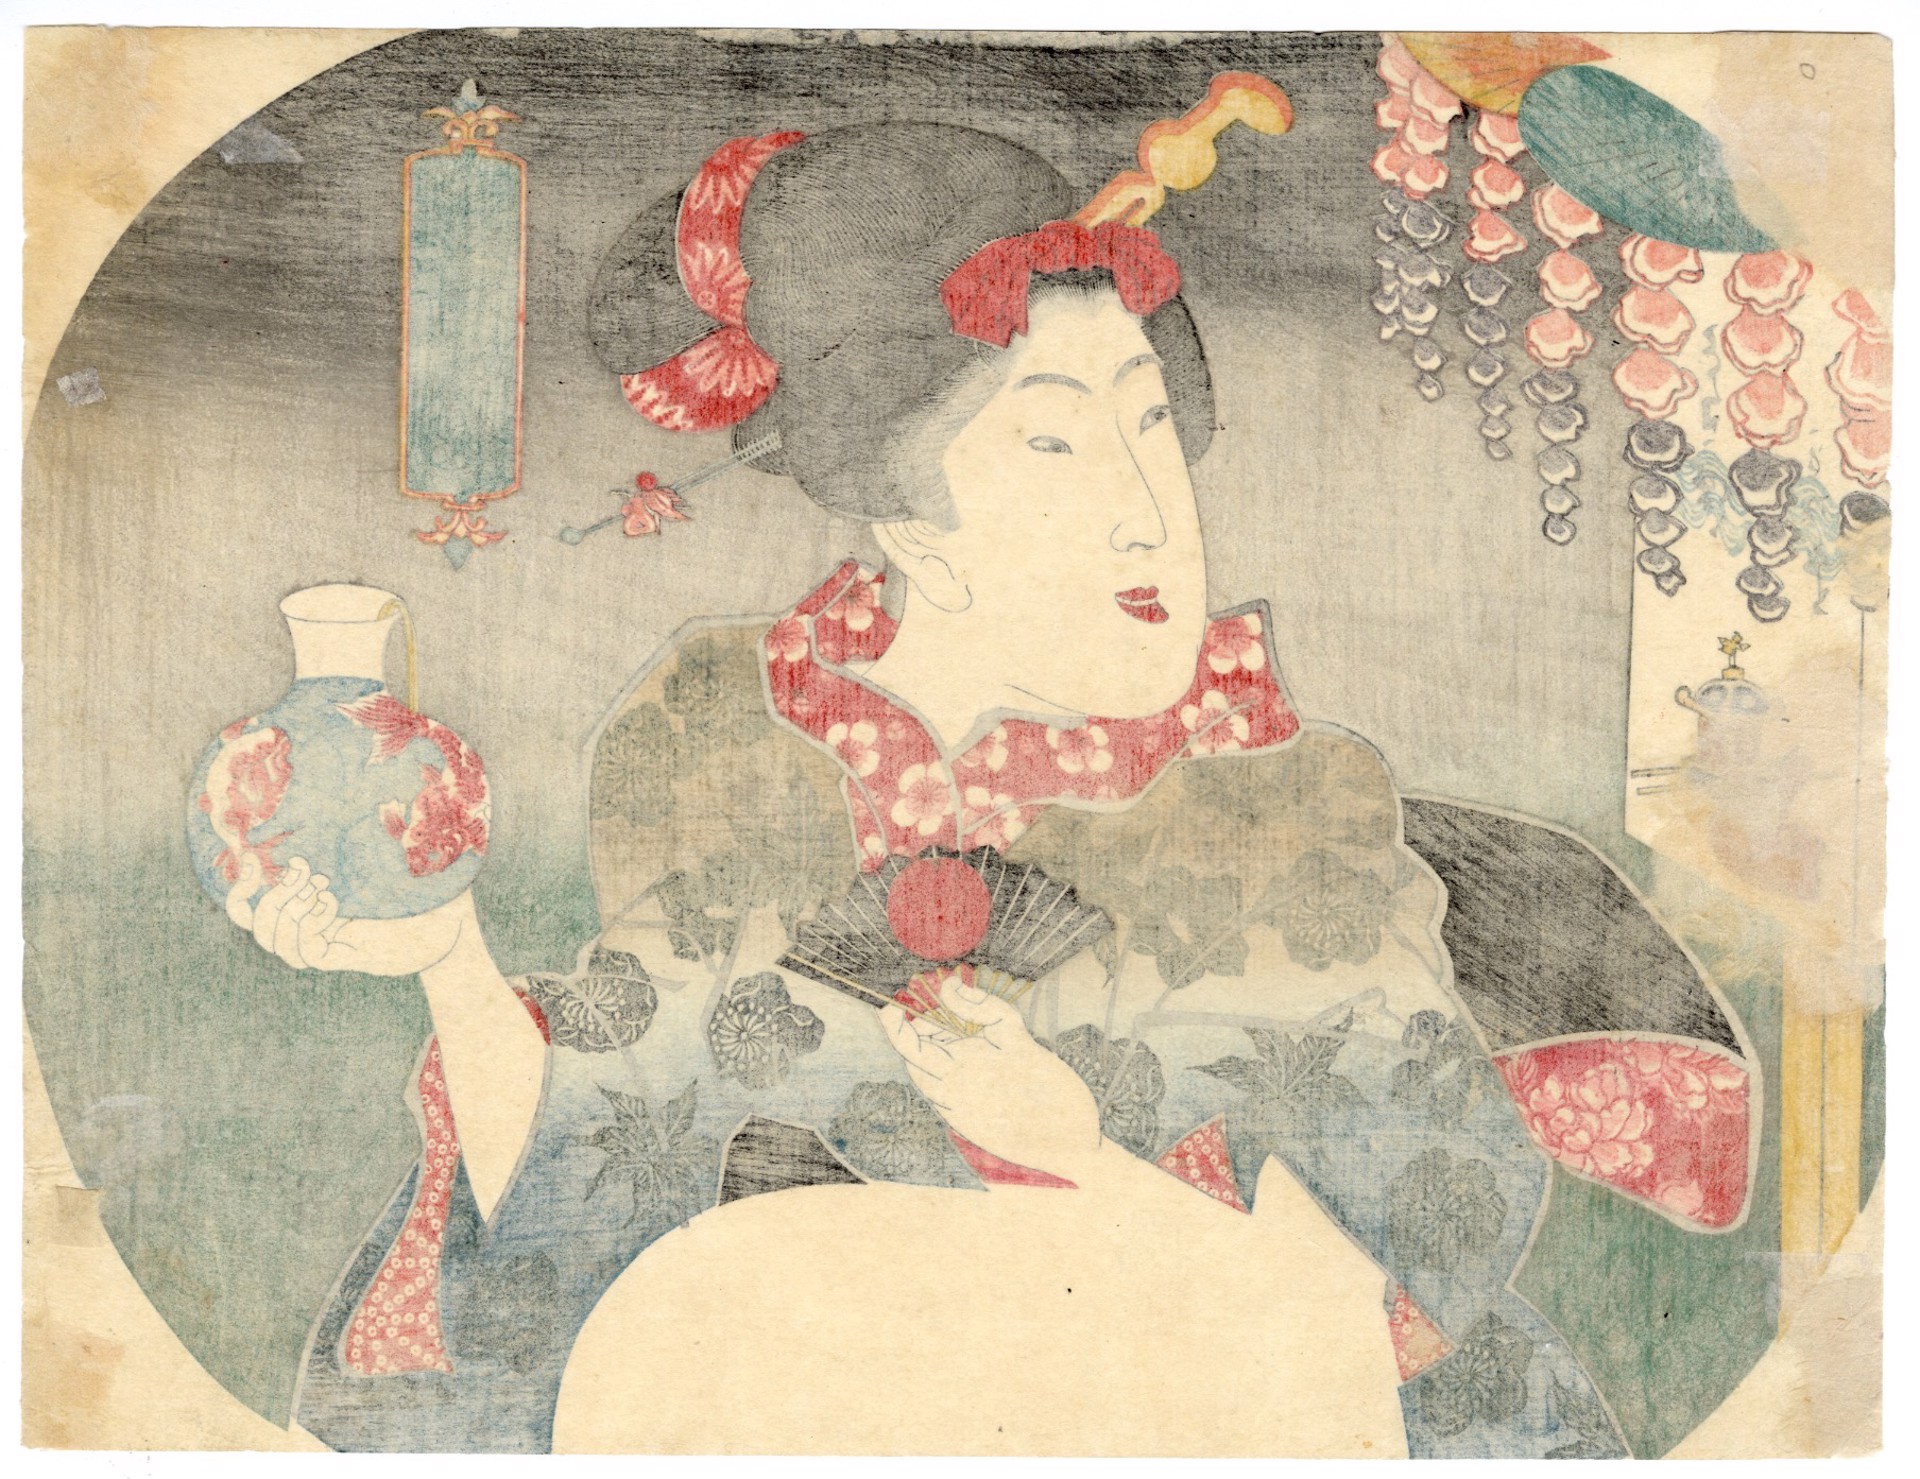 A Beauty Holding a Bowl of Goldfish Up For Comparison by Kunisada